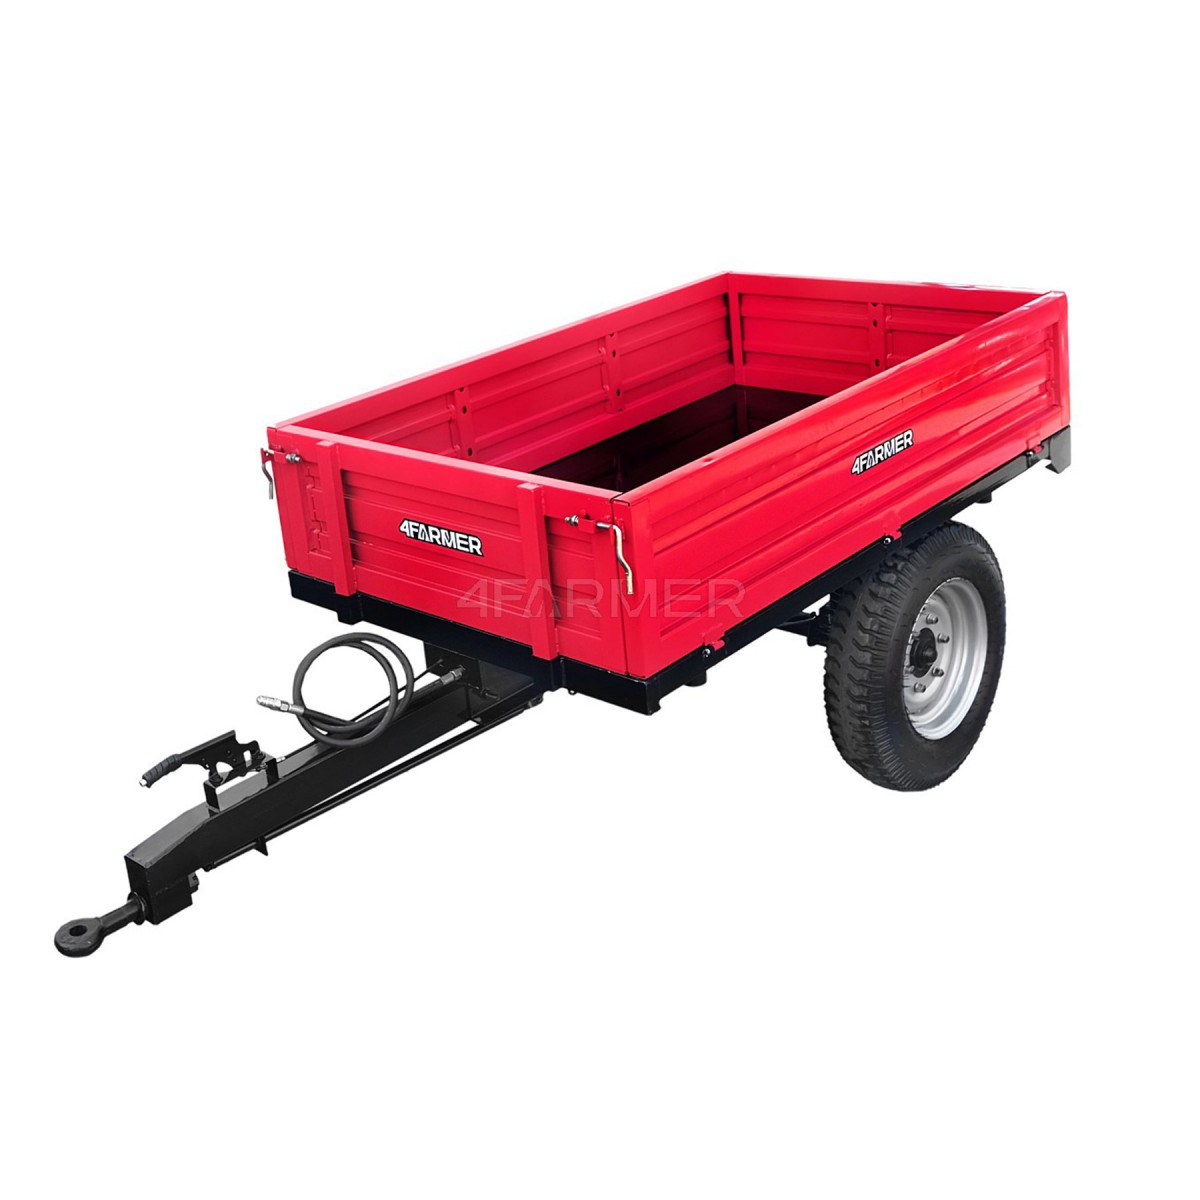 Single-axle agricultural trailer 1.5T with a 4FARMER tipper